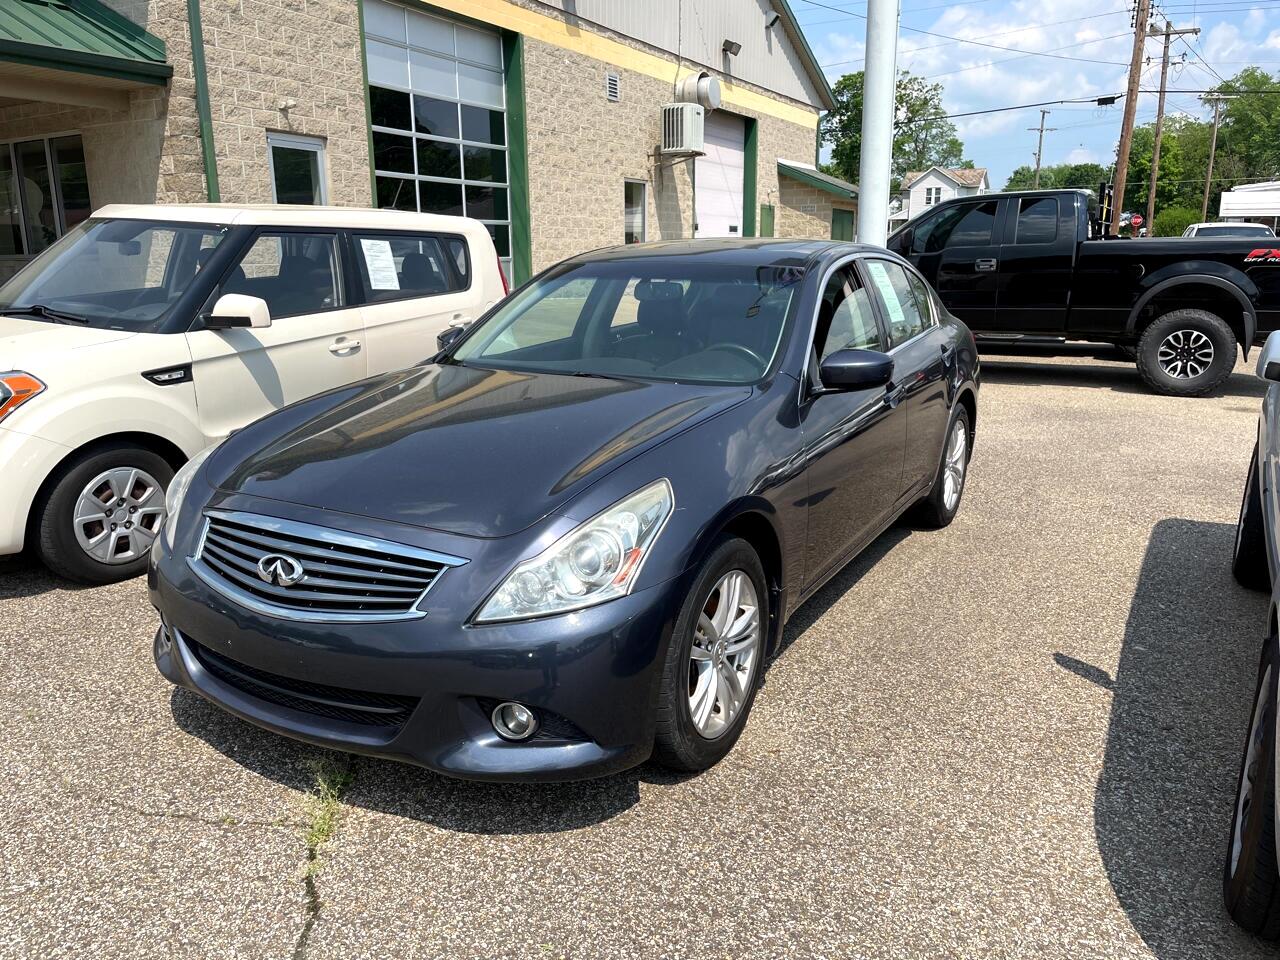 Used 2011 Infiniti G25 Sedan 4dr x AWD for Sale in Zanesville OH 43701  Finks Quality Used Cars